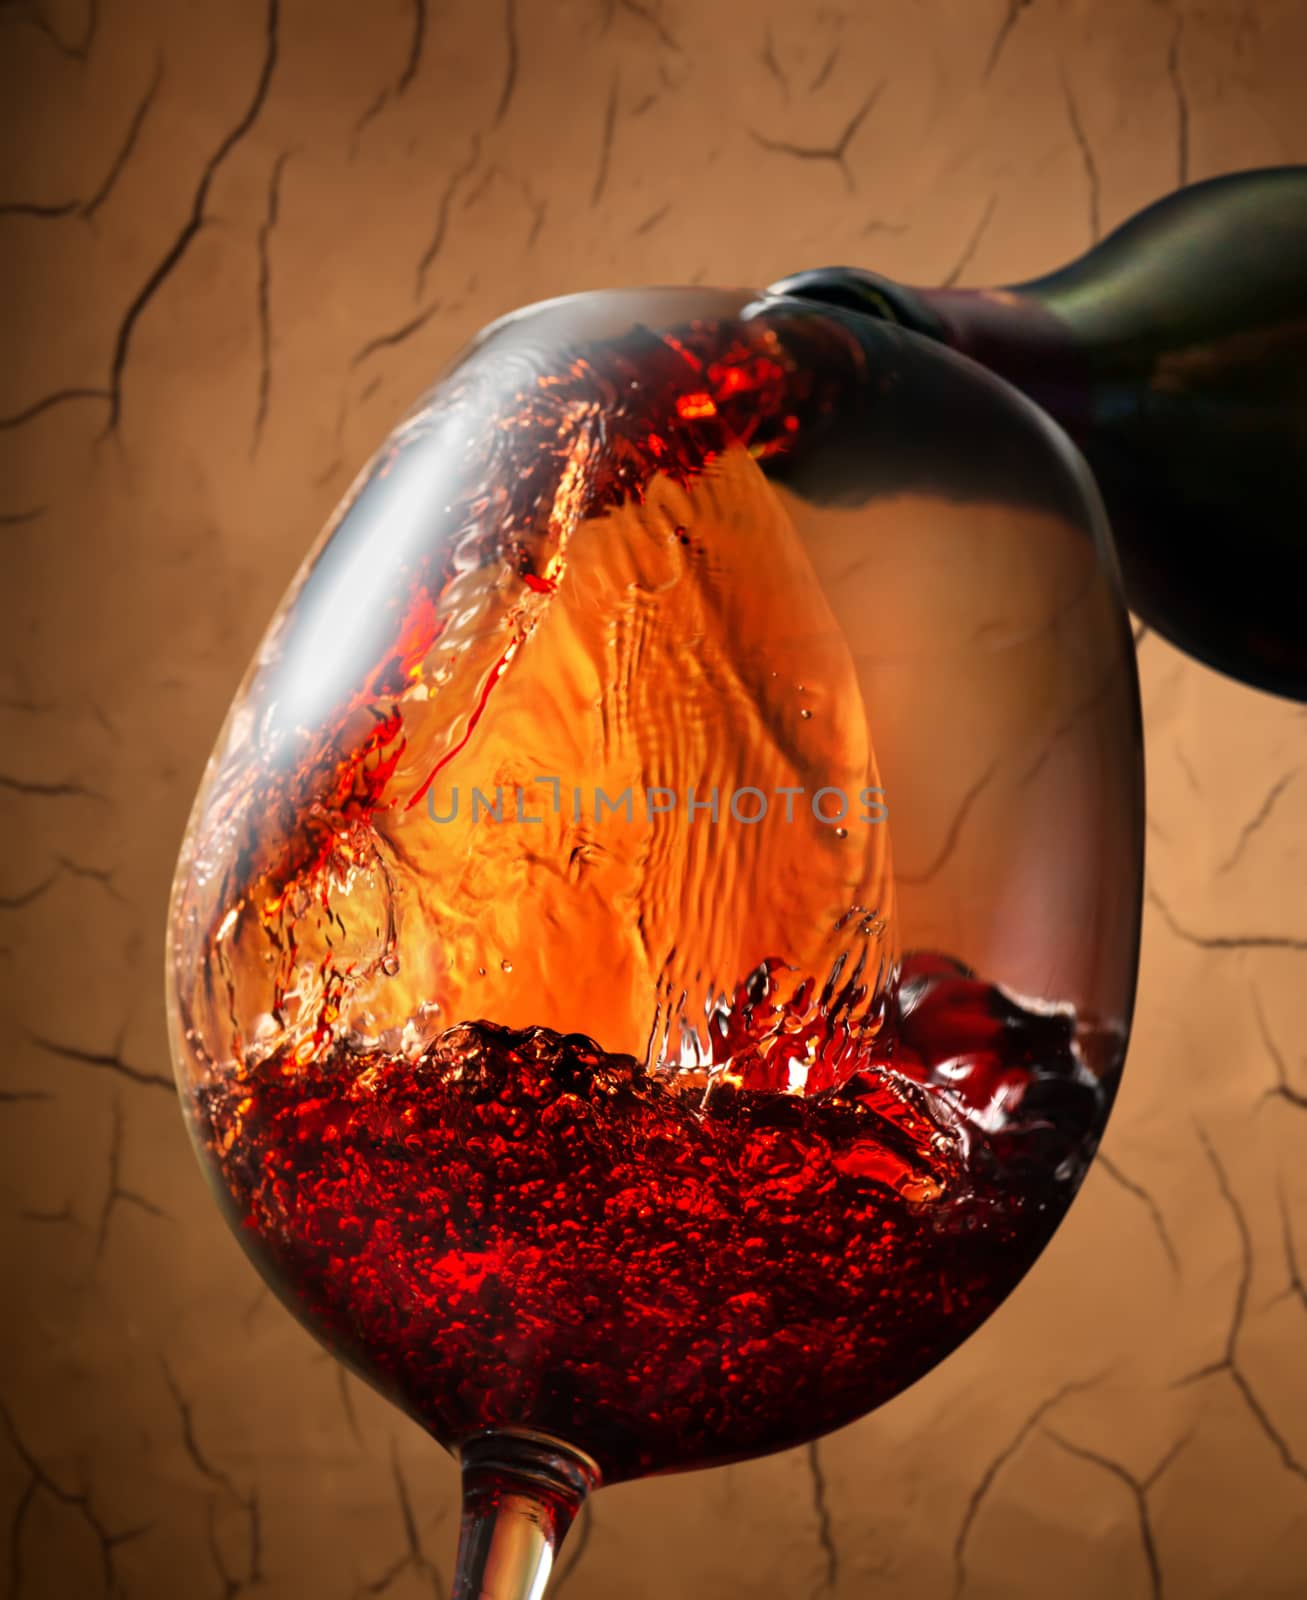 Red wine pouring into wineglass on clay background